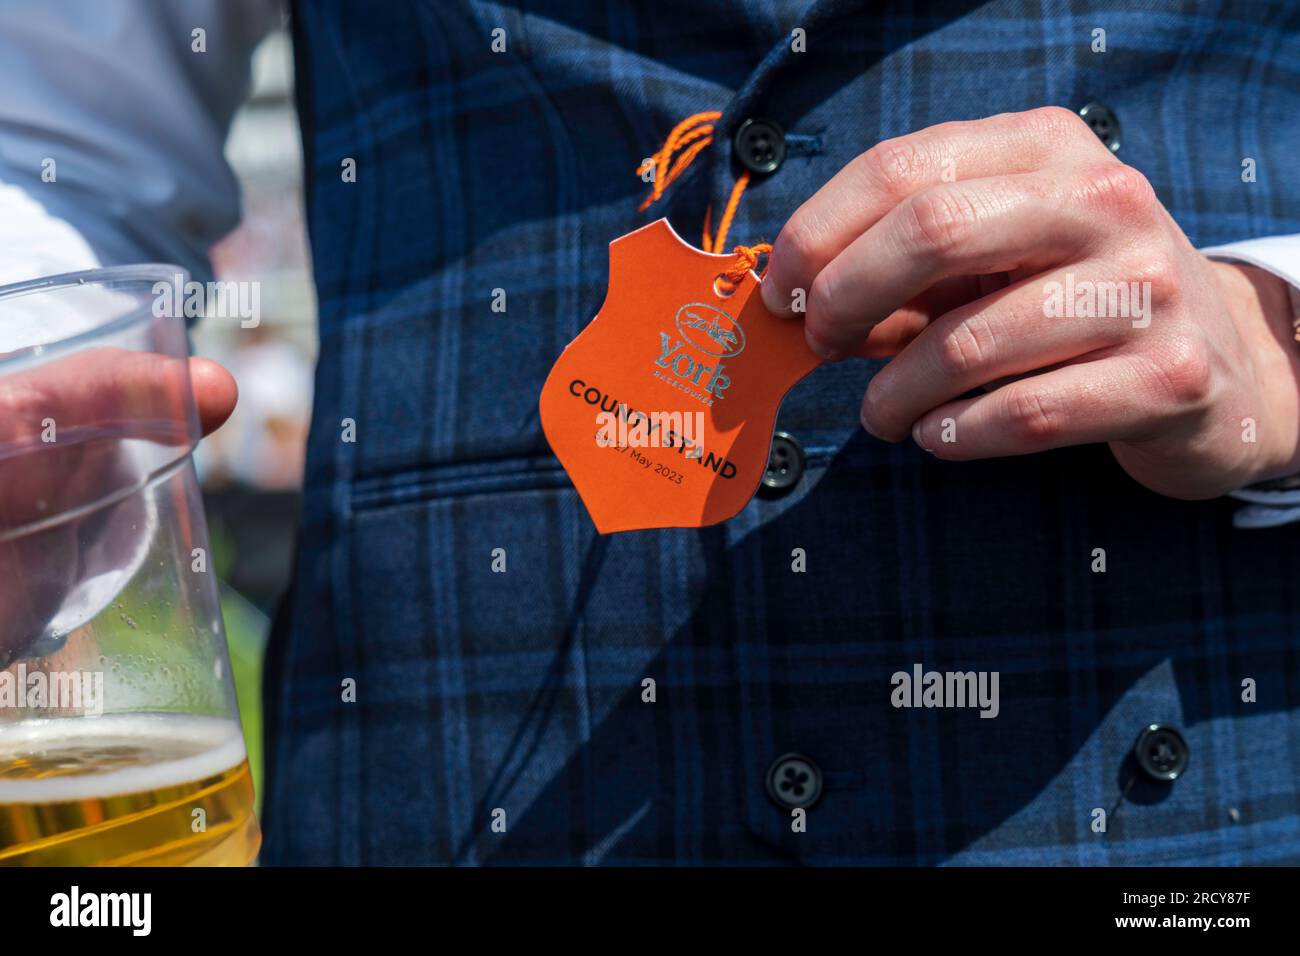 York horse race, a well-dressed man in an English style suit shows his pass for the York racecourse and his beer, during a popular horse racing event. Stock Photo